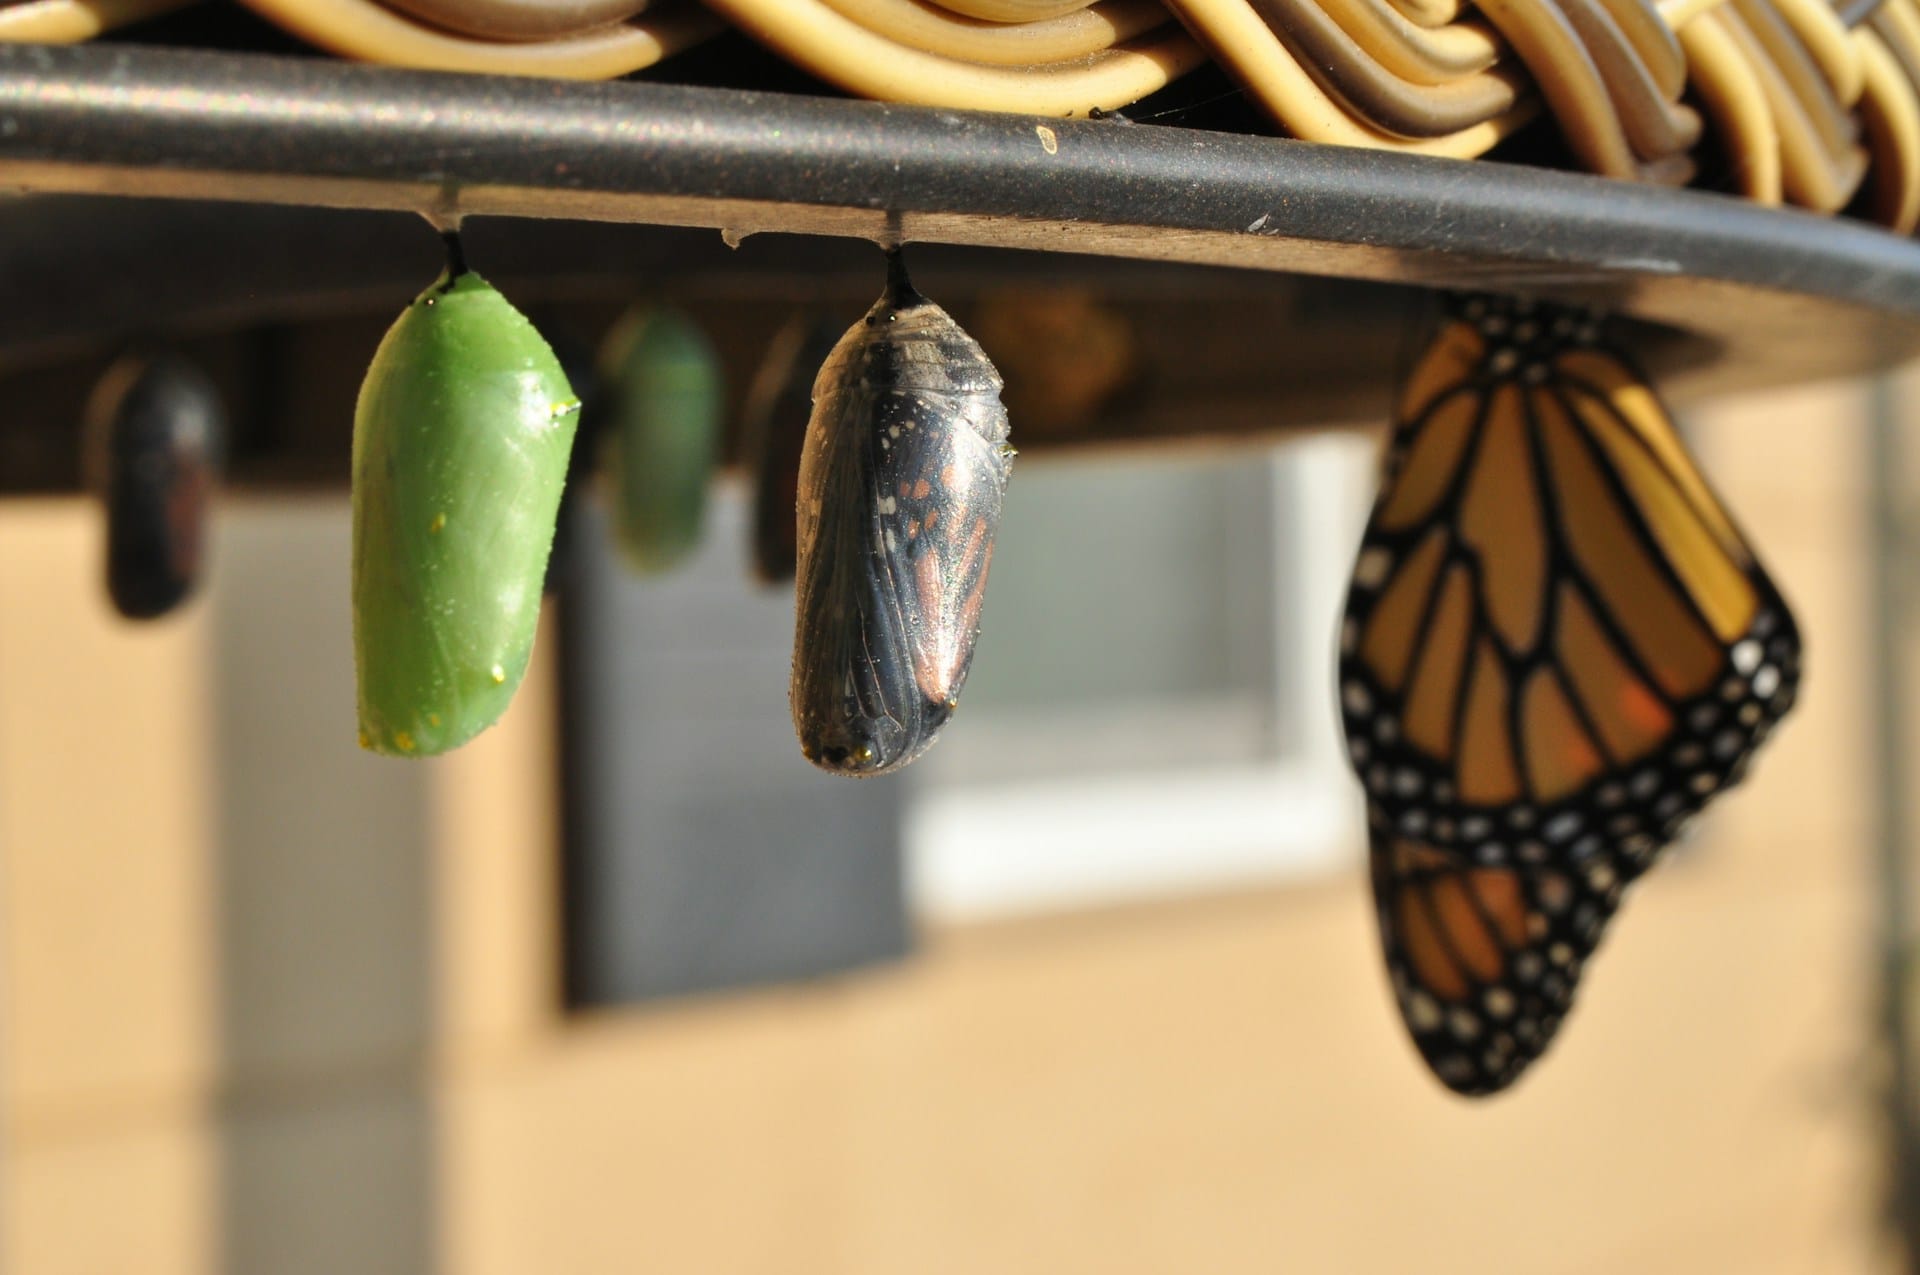 butterfly chrysalis in three stages of evolution: a new green one, a transparent one, and a butterfly that has emerged